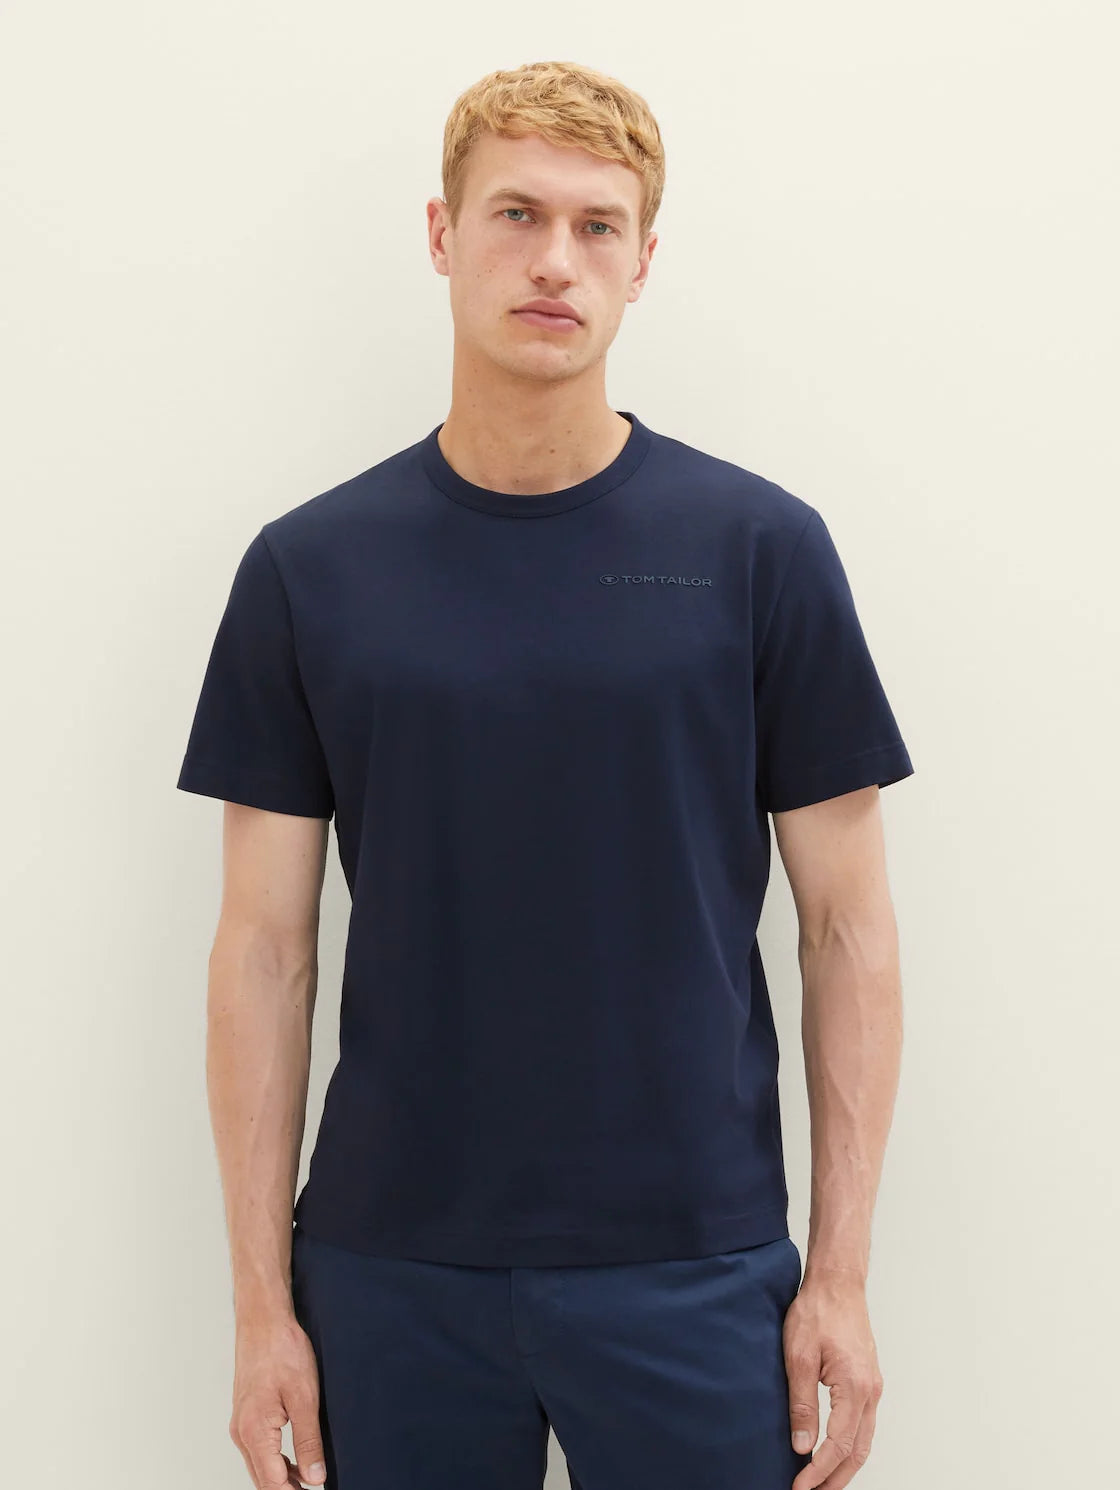 Tom Tailor T-Shirts